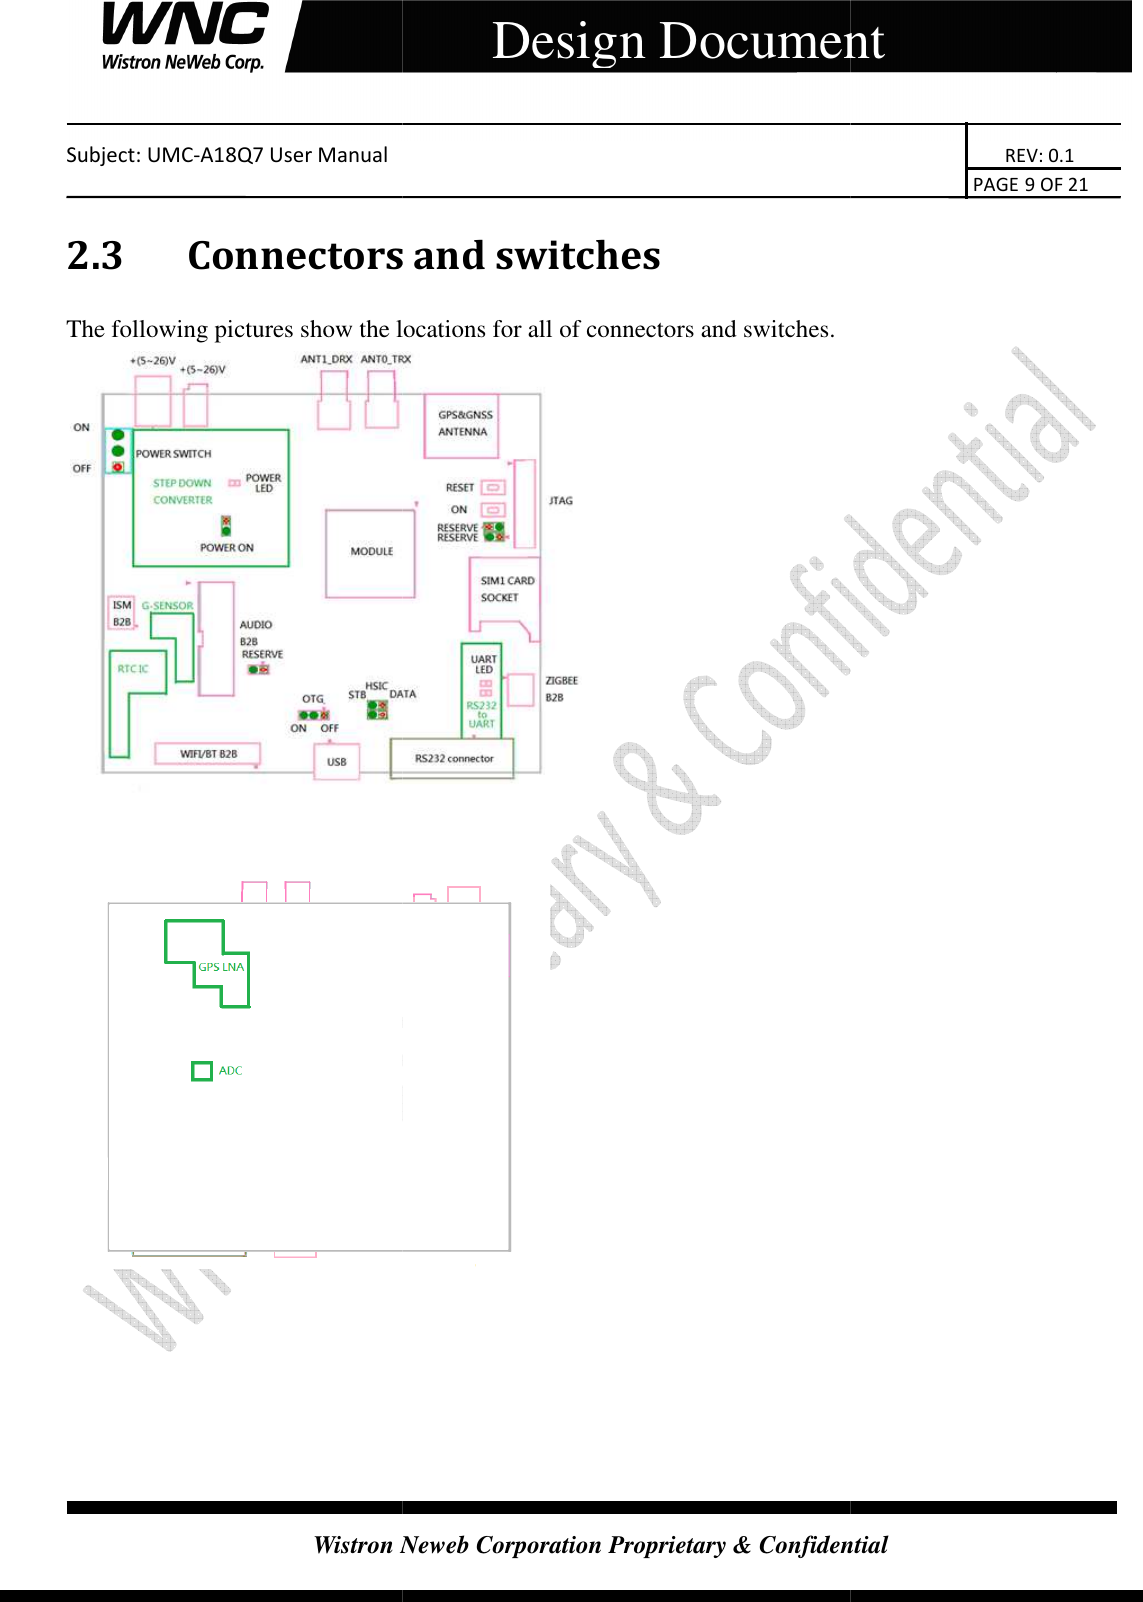    Subject: UMC-A18Q7 User Manual                                                                                                                                         Wistron Neweb Corporation Proprietary &amp; Confidential  2.3   ConnectorsThe following pictures show the locations for all of     User Manual                                                                                                                                                                                                           Wistron Neweb Corporation Proprietary &amp; Confidential  Design Documentonnectors and switches The following pictures show the locations for all of connectors and switches.                      REV: 0.1                                     PAGE 9 OF 21 Wistron Neweb Corporation Proprietary &amp; Confidential Design Document 